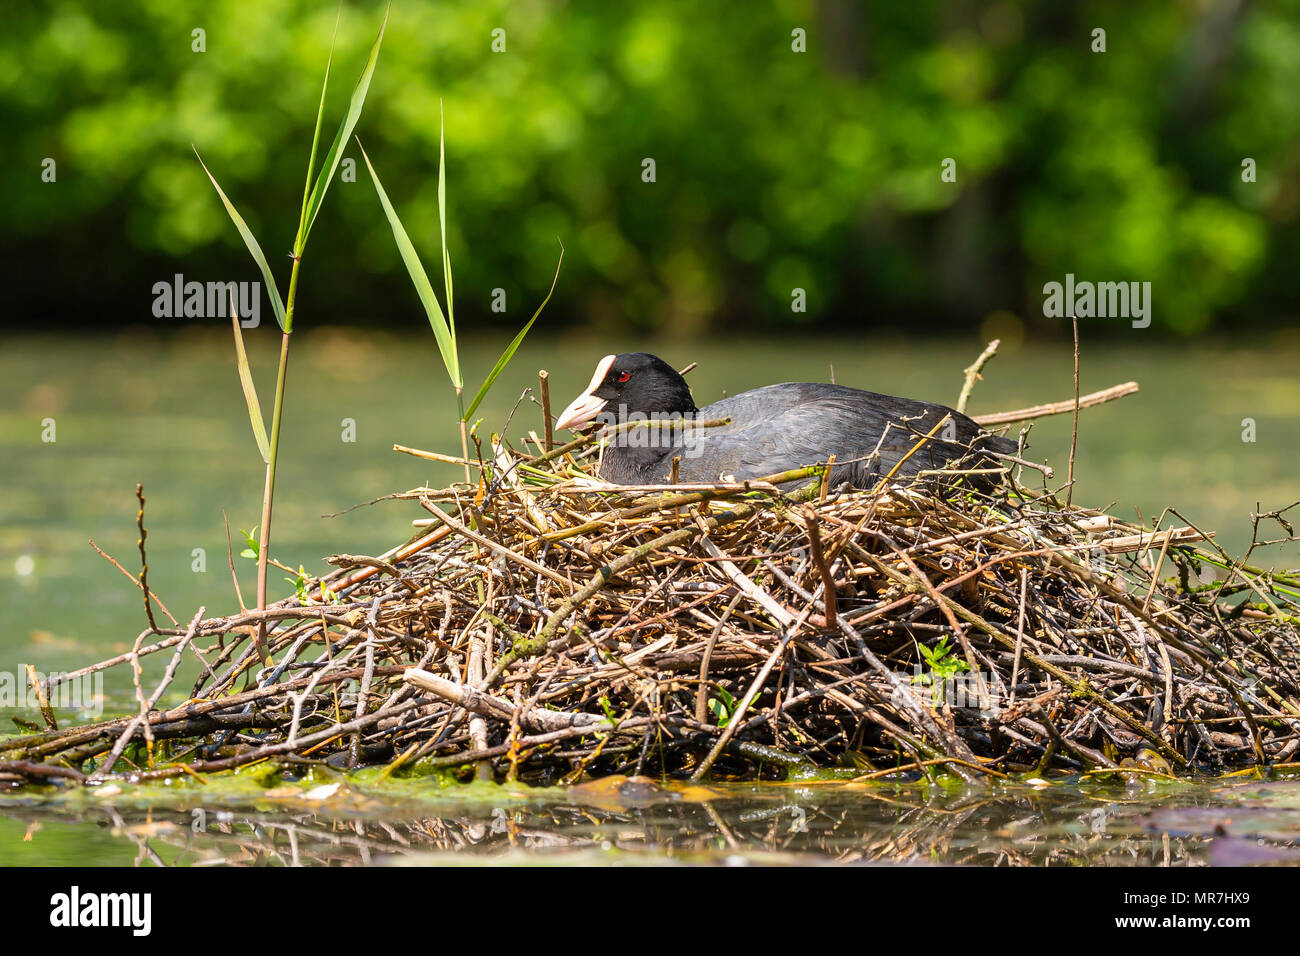 Closeup of a Eurasian coot (Fulica atra) sitting on a nest with eggs during Springtime season. Stock Photo